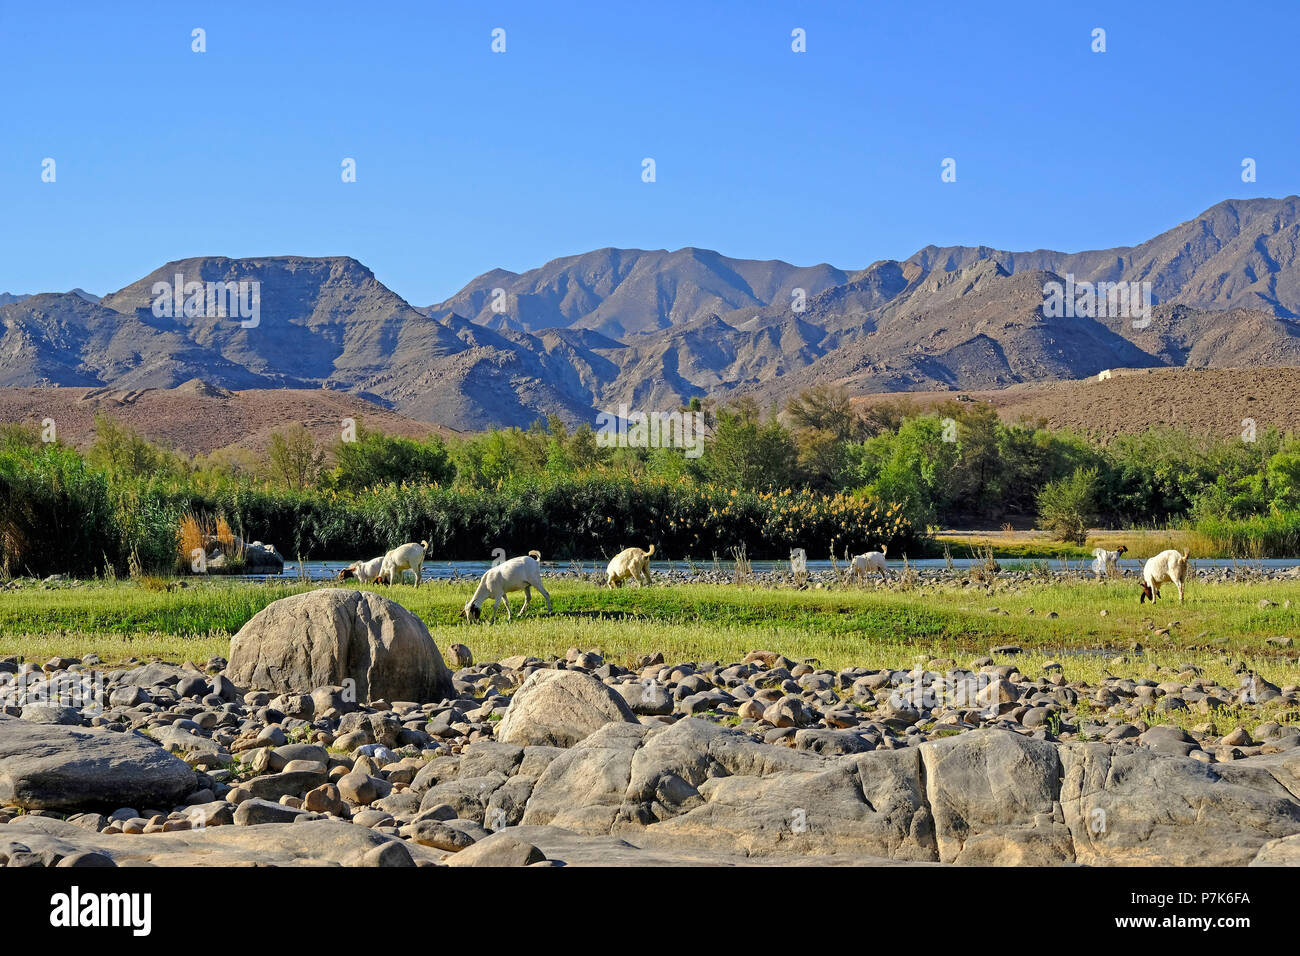 stony riverbed of the Orange River / Oranjerivier (border river) in Richtersveld with grazing herd of goats, opposite side mountains in Namibia, Namaqua, South Africa Stock Photo